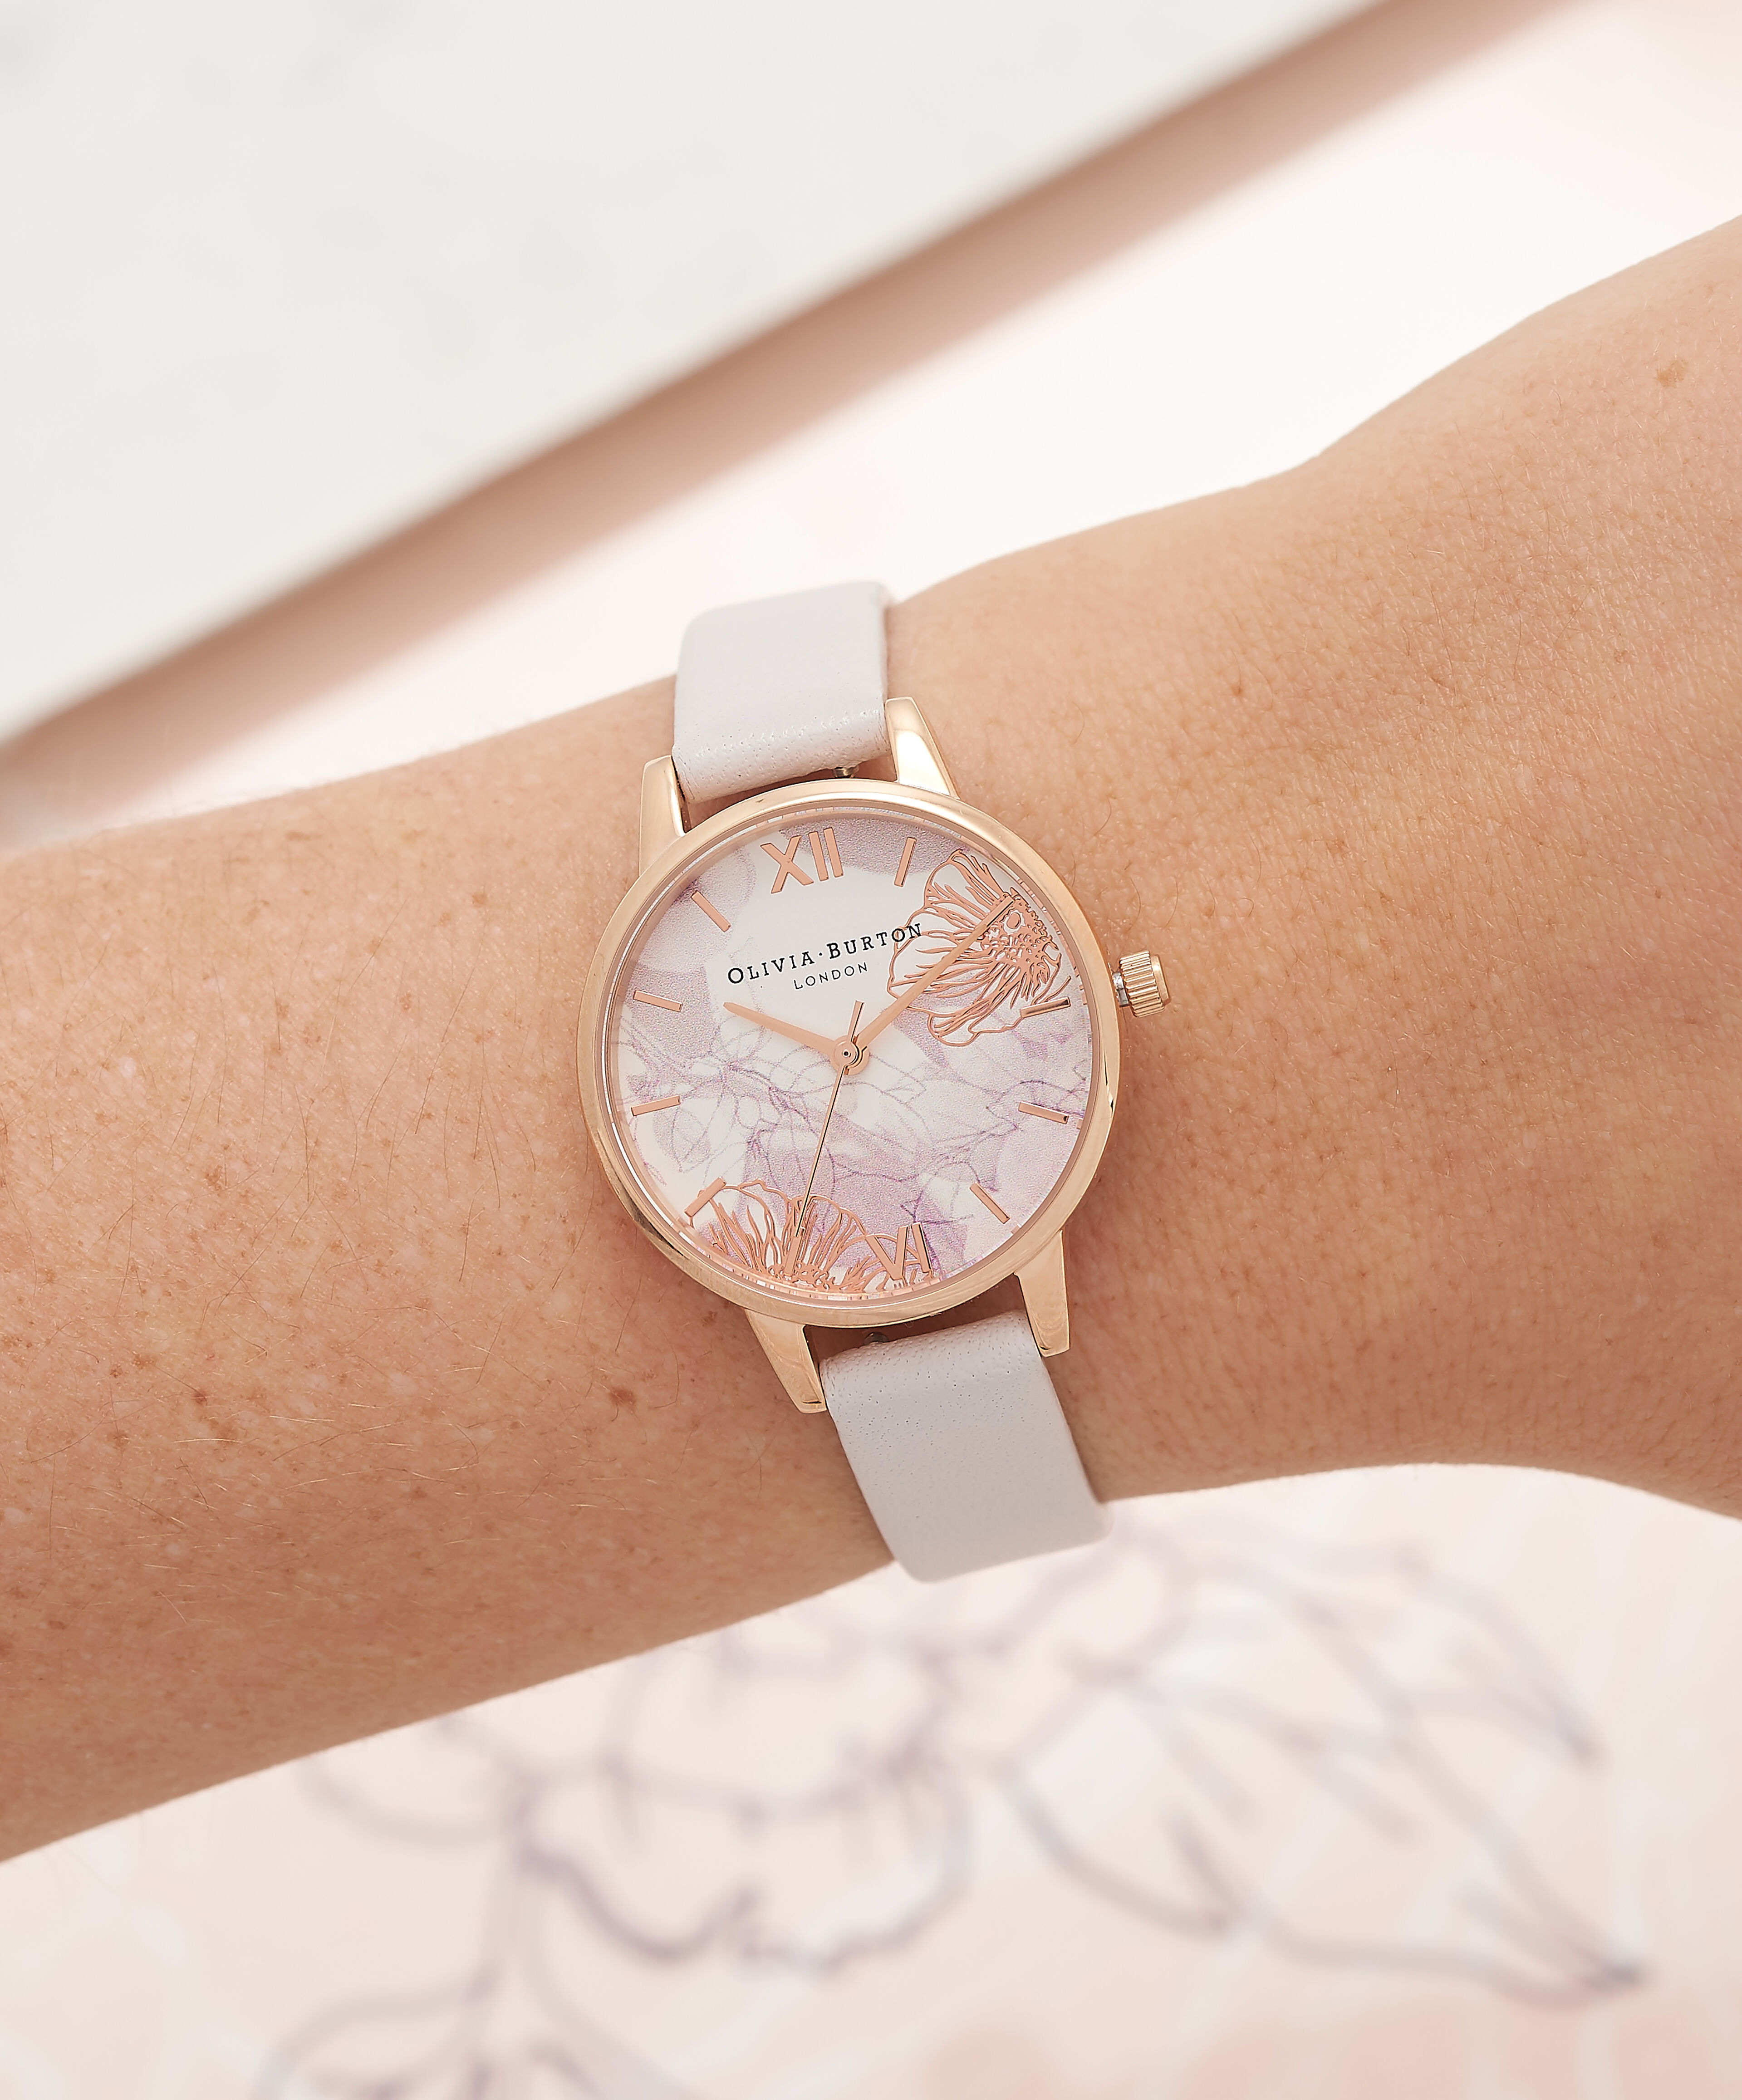 Abstract Florals 30mm Rose Gold & Blush Leather Strap Watch 